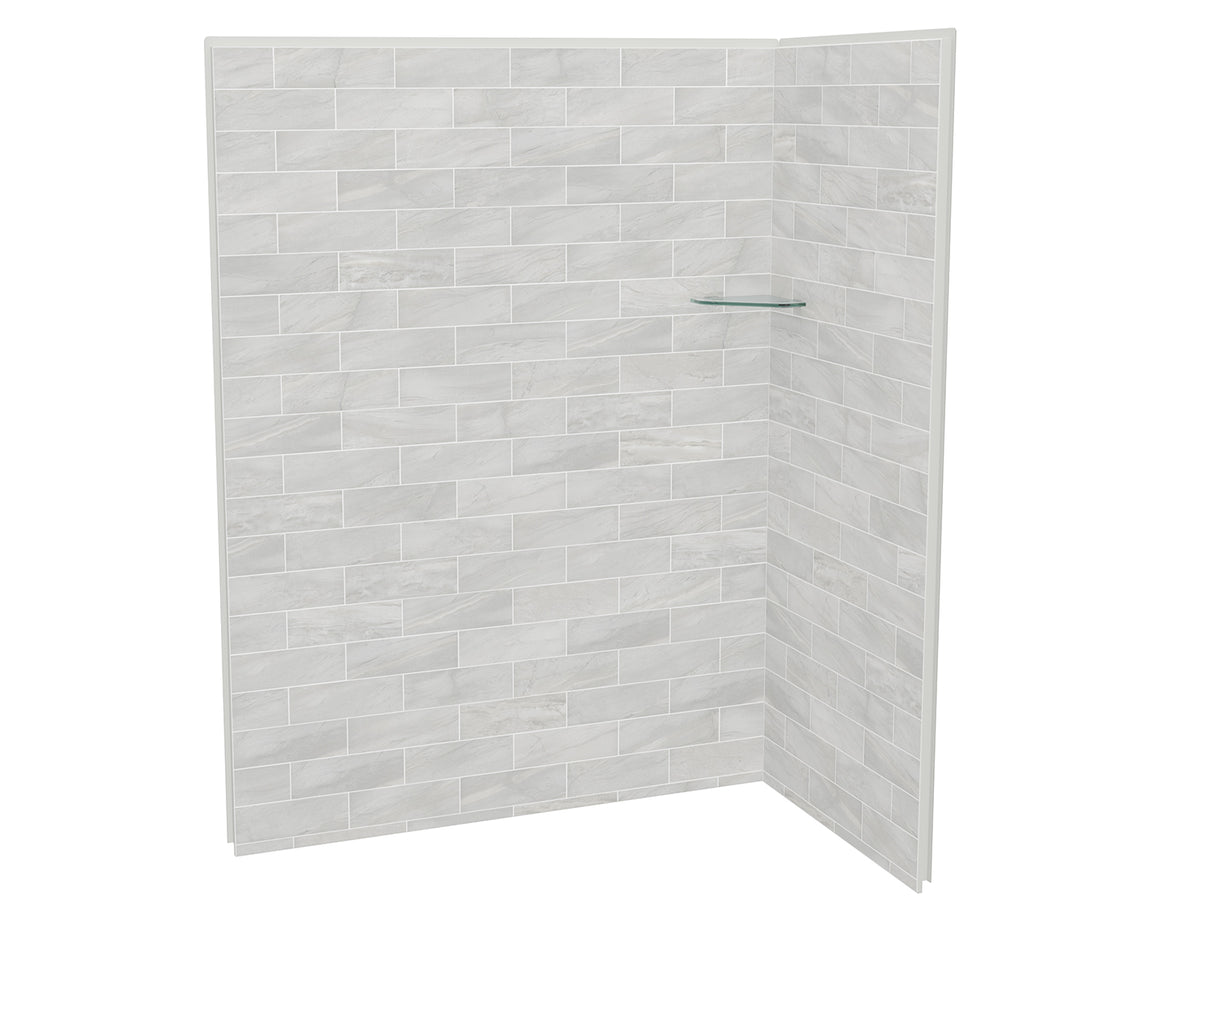 MAAX 107465-312-504 Utile 6032 Composite Direct-to-Stud Two-Piece Corner Shower Wall Kit in Organik Permafrost